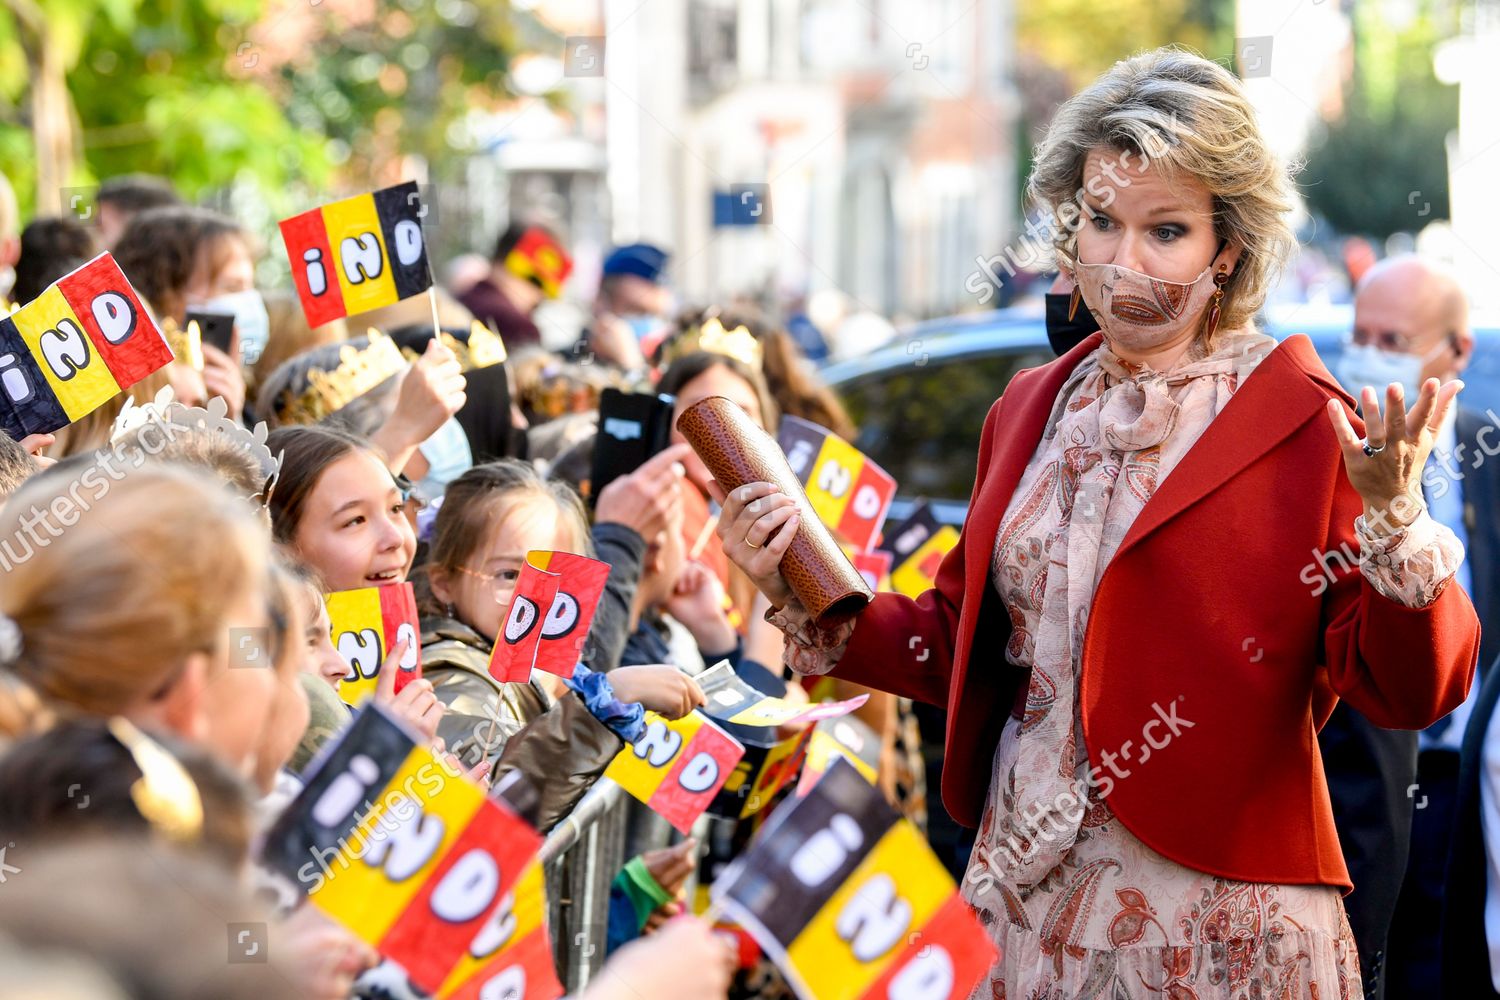 queen-mathilde-and-king-philippe-visit-the-province-of-luxembourg-vielsalm-belgium-shutterstock-editorial-12529850an.jpg